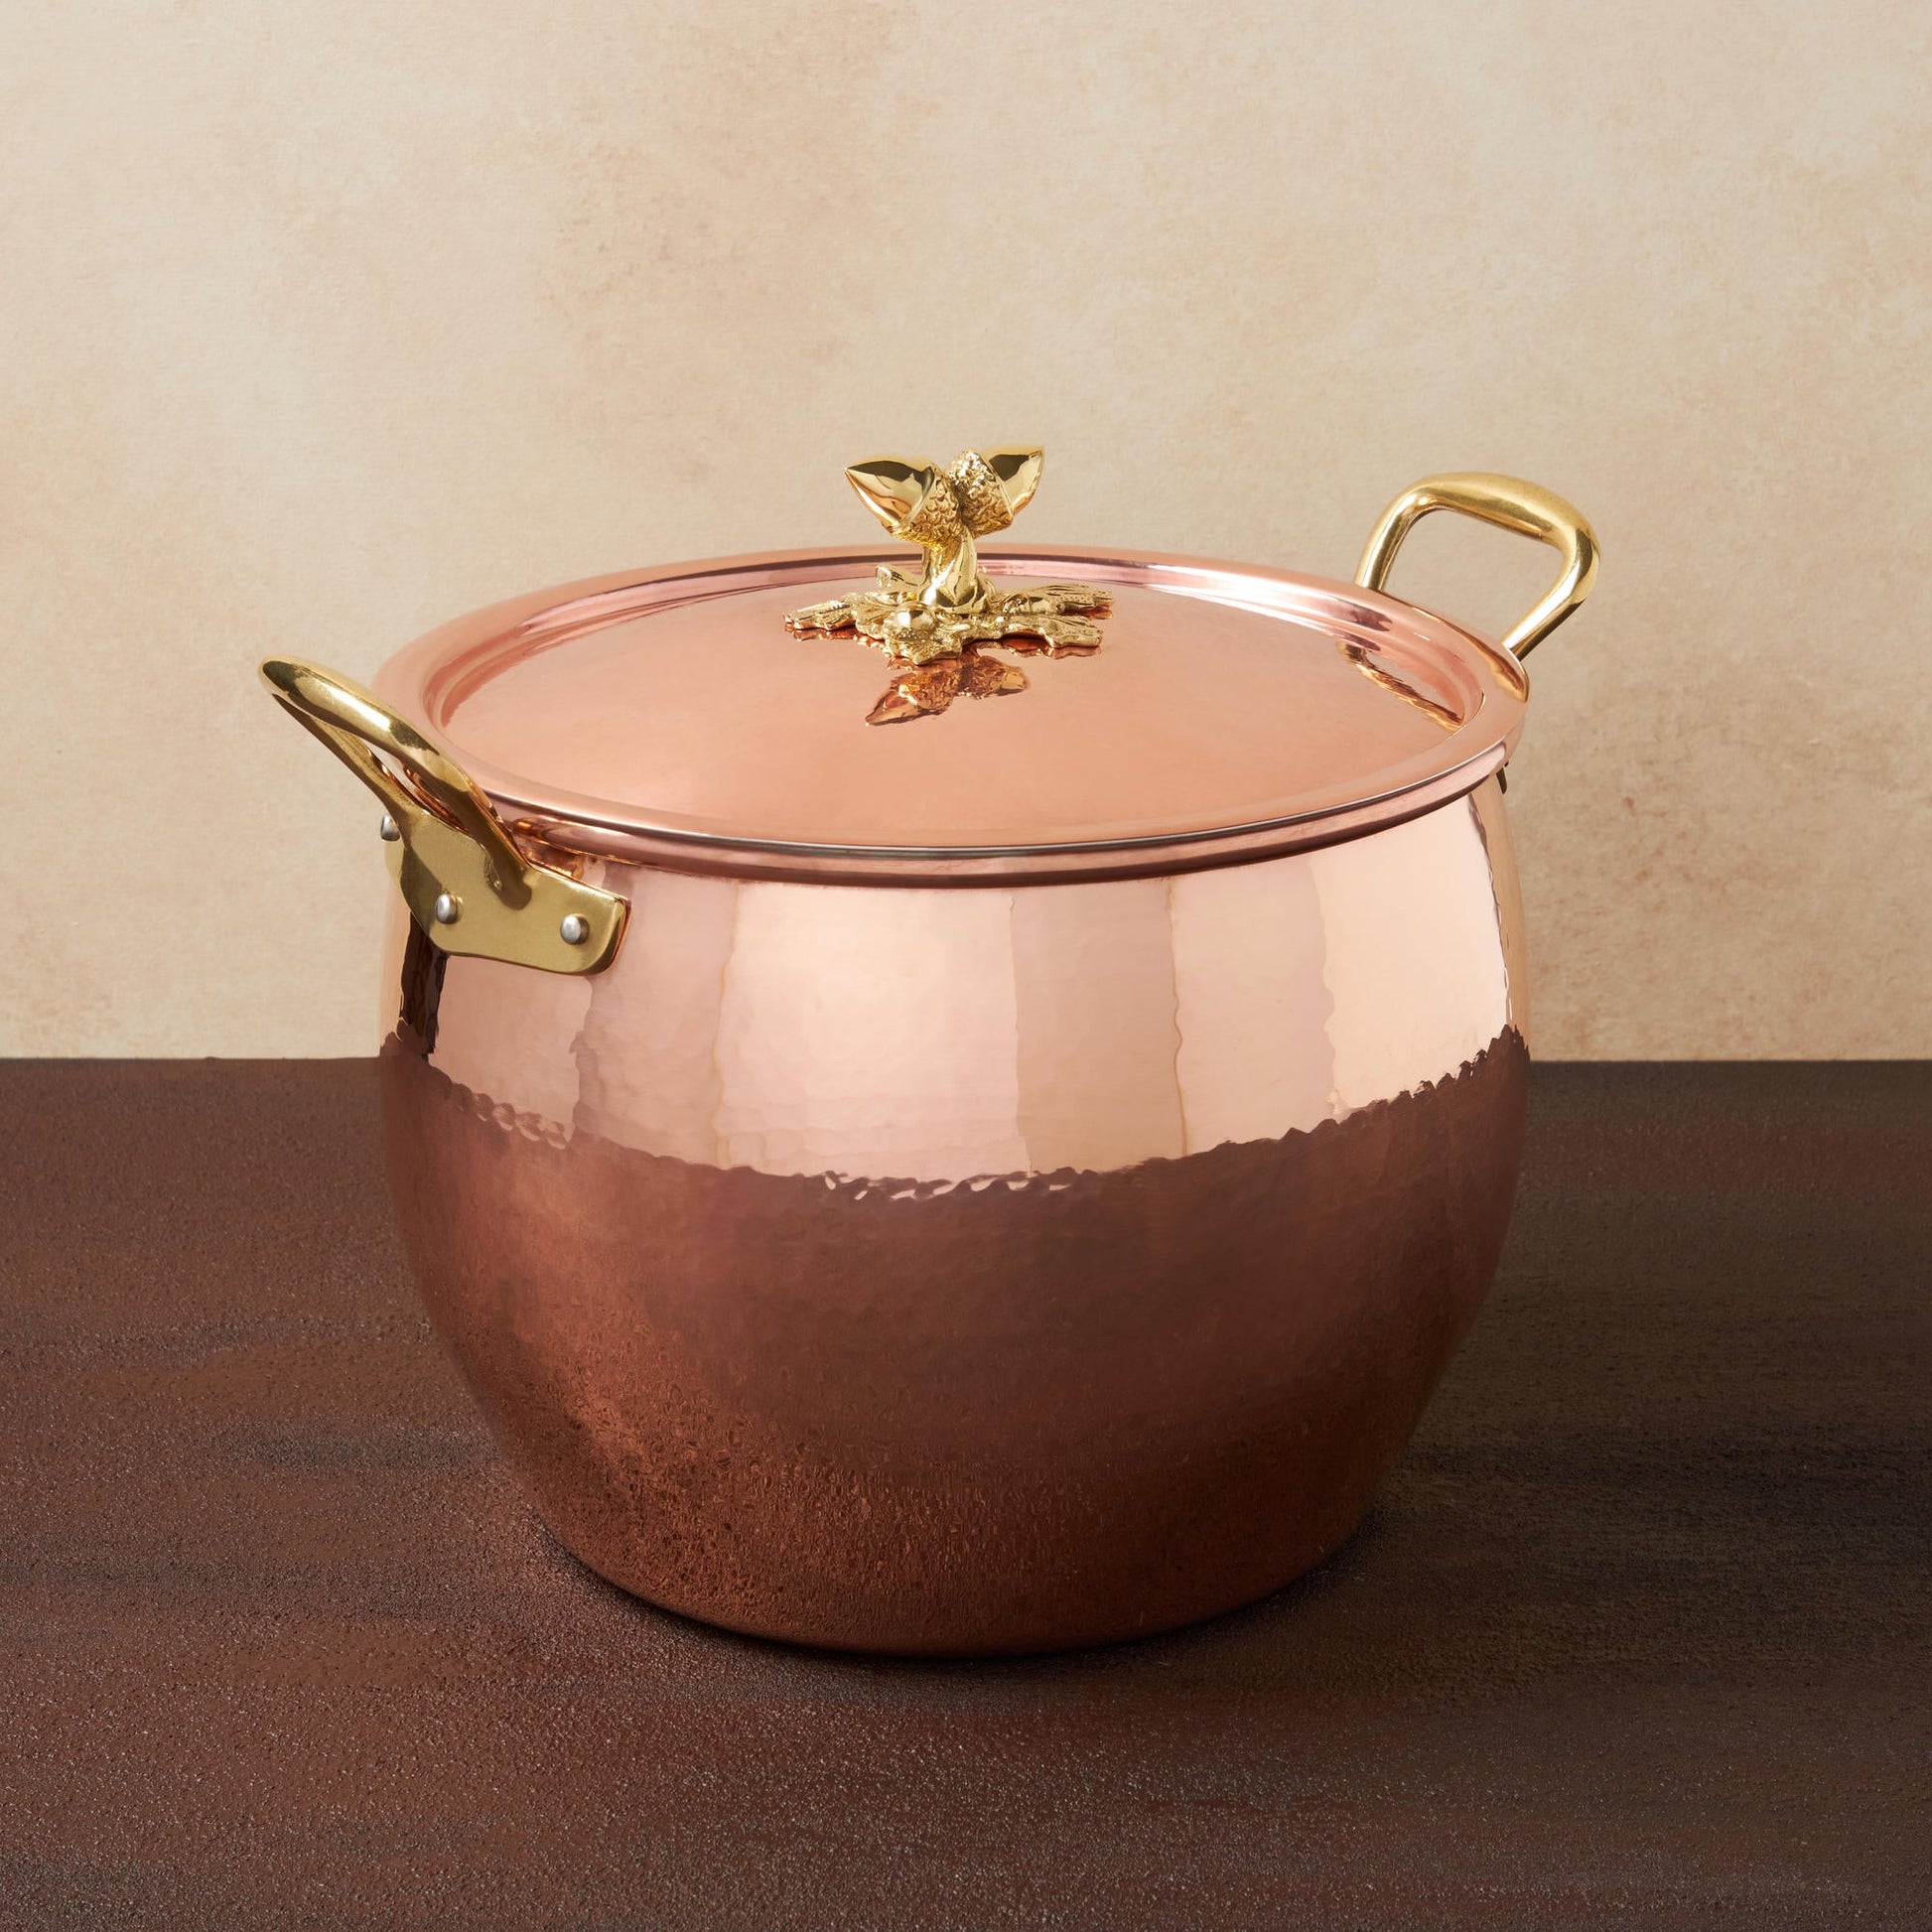 Hammered copper 12 Qt Stockpot  lined with high purity tin applied by hand over fire and bronze handles, from Ruffoni Historia collection